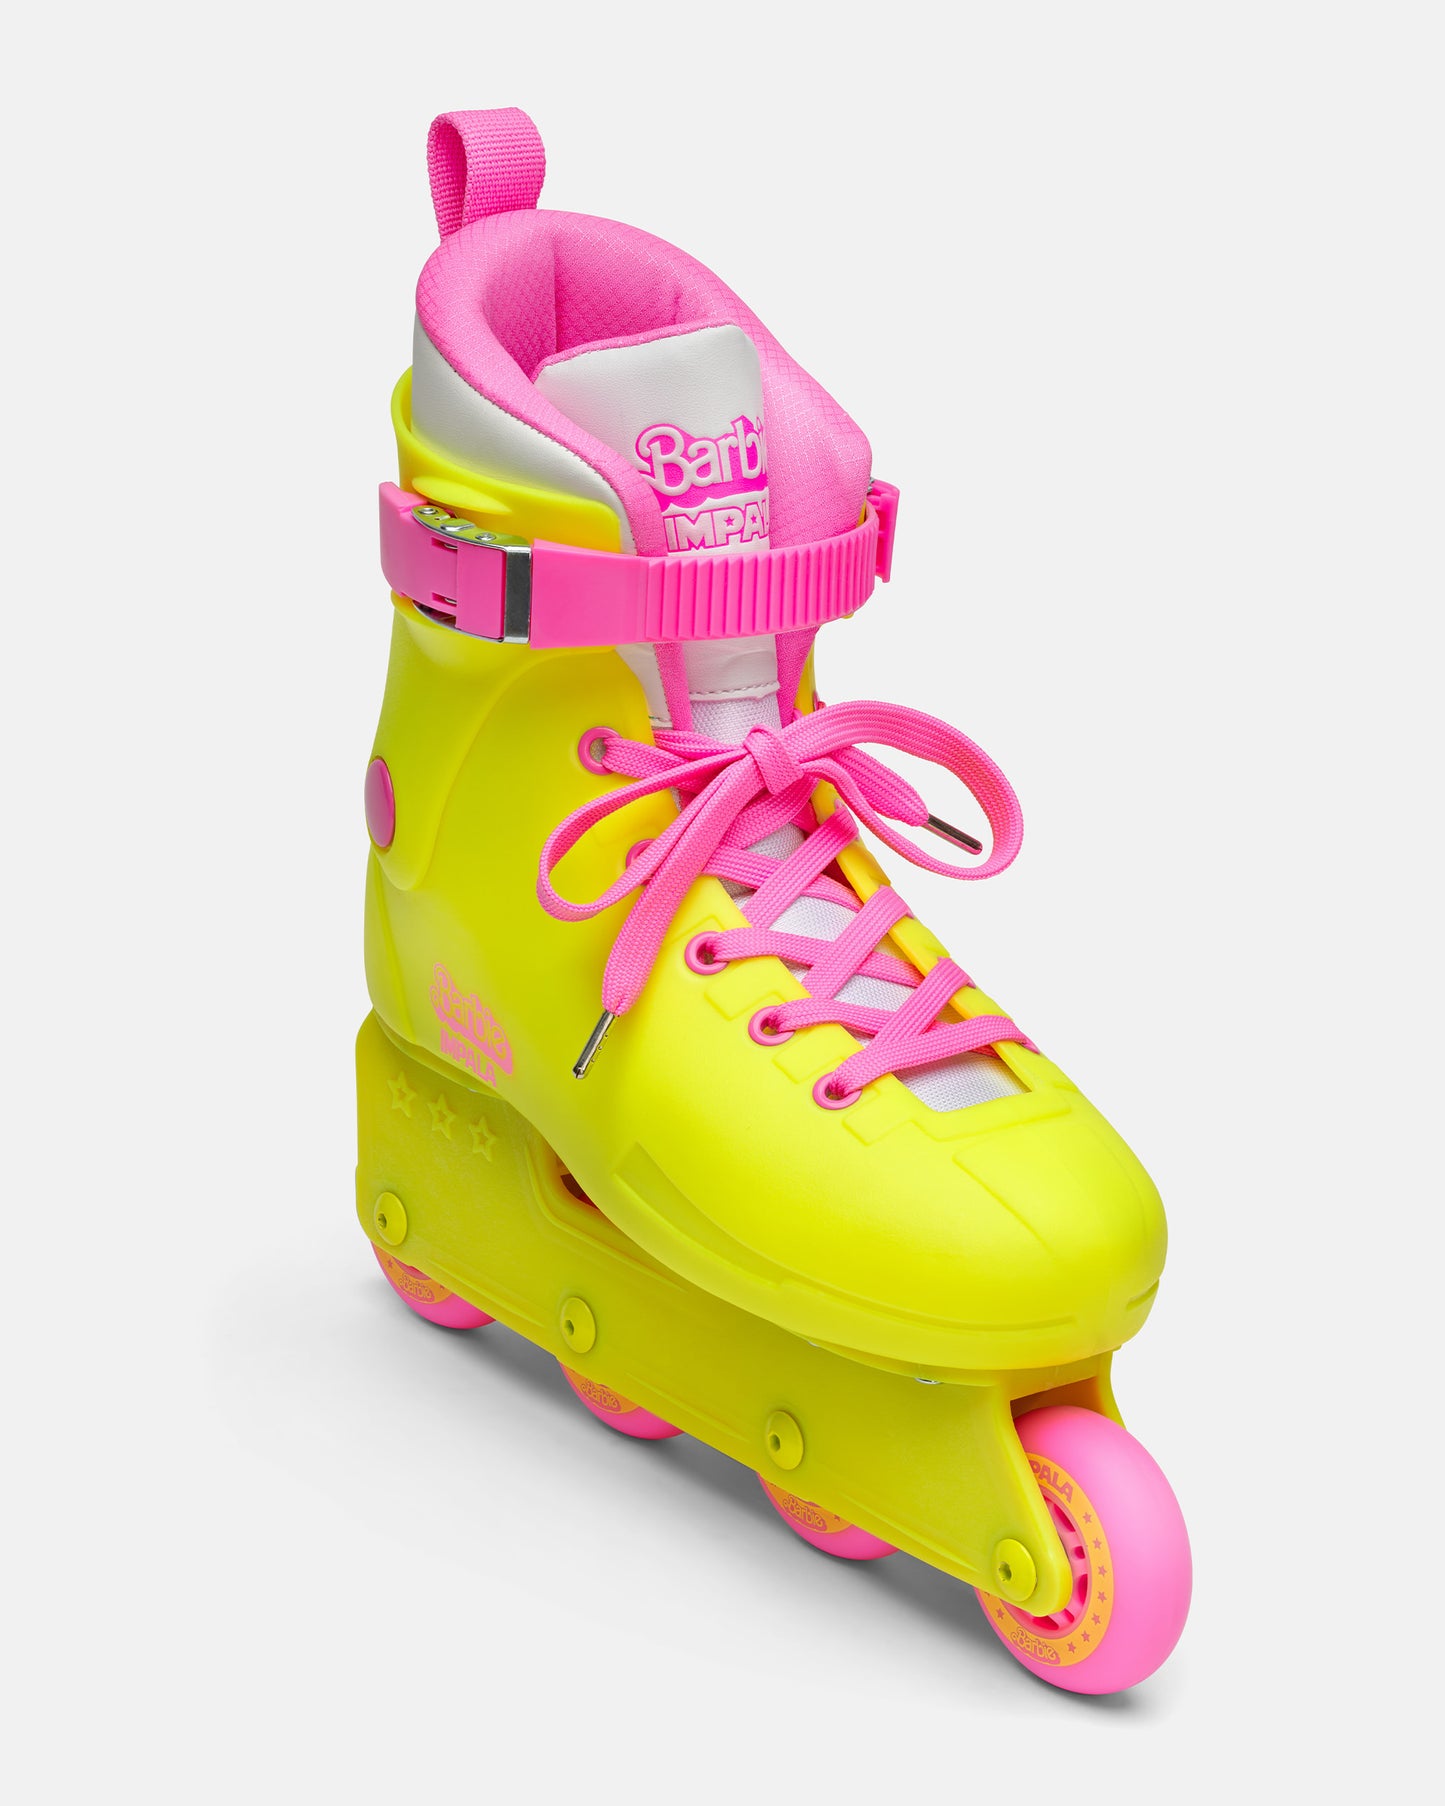 Front angled view of the Impala Lightspeed Inline Skate - Barbie Bright Yellow